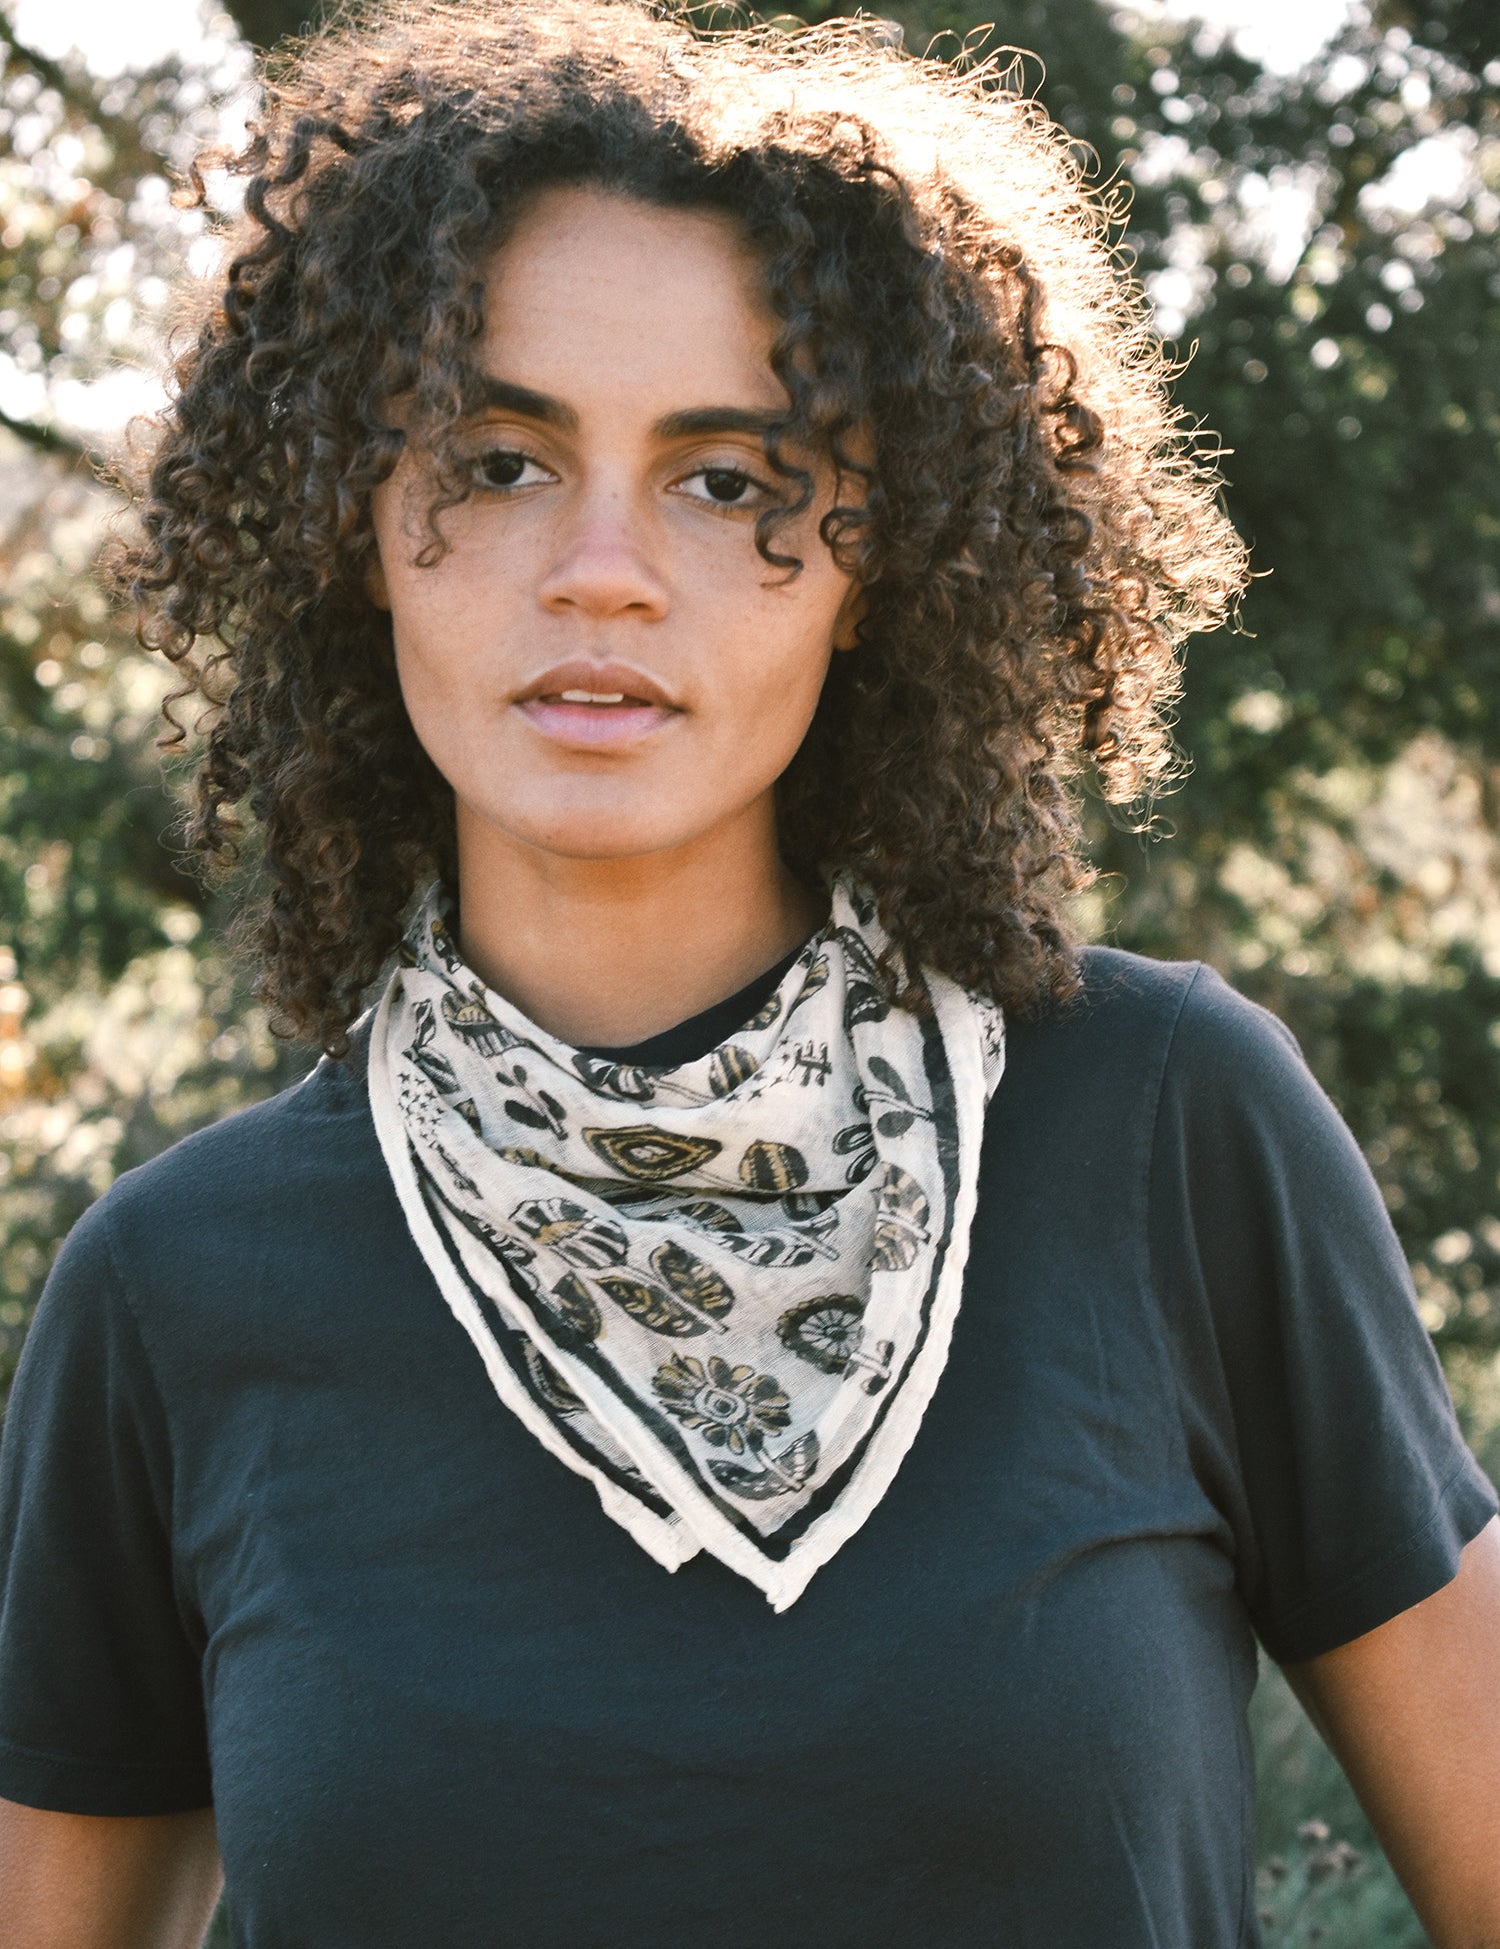 Woman wearing block print Paradise bandana tied around neck against a black tee shirt. Trees are in the background.